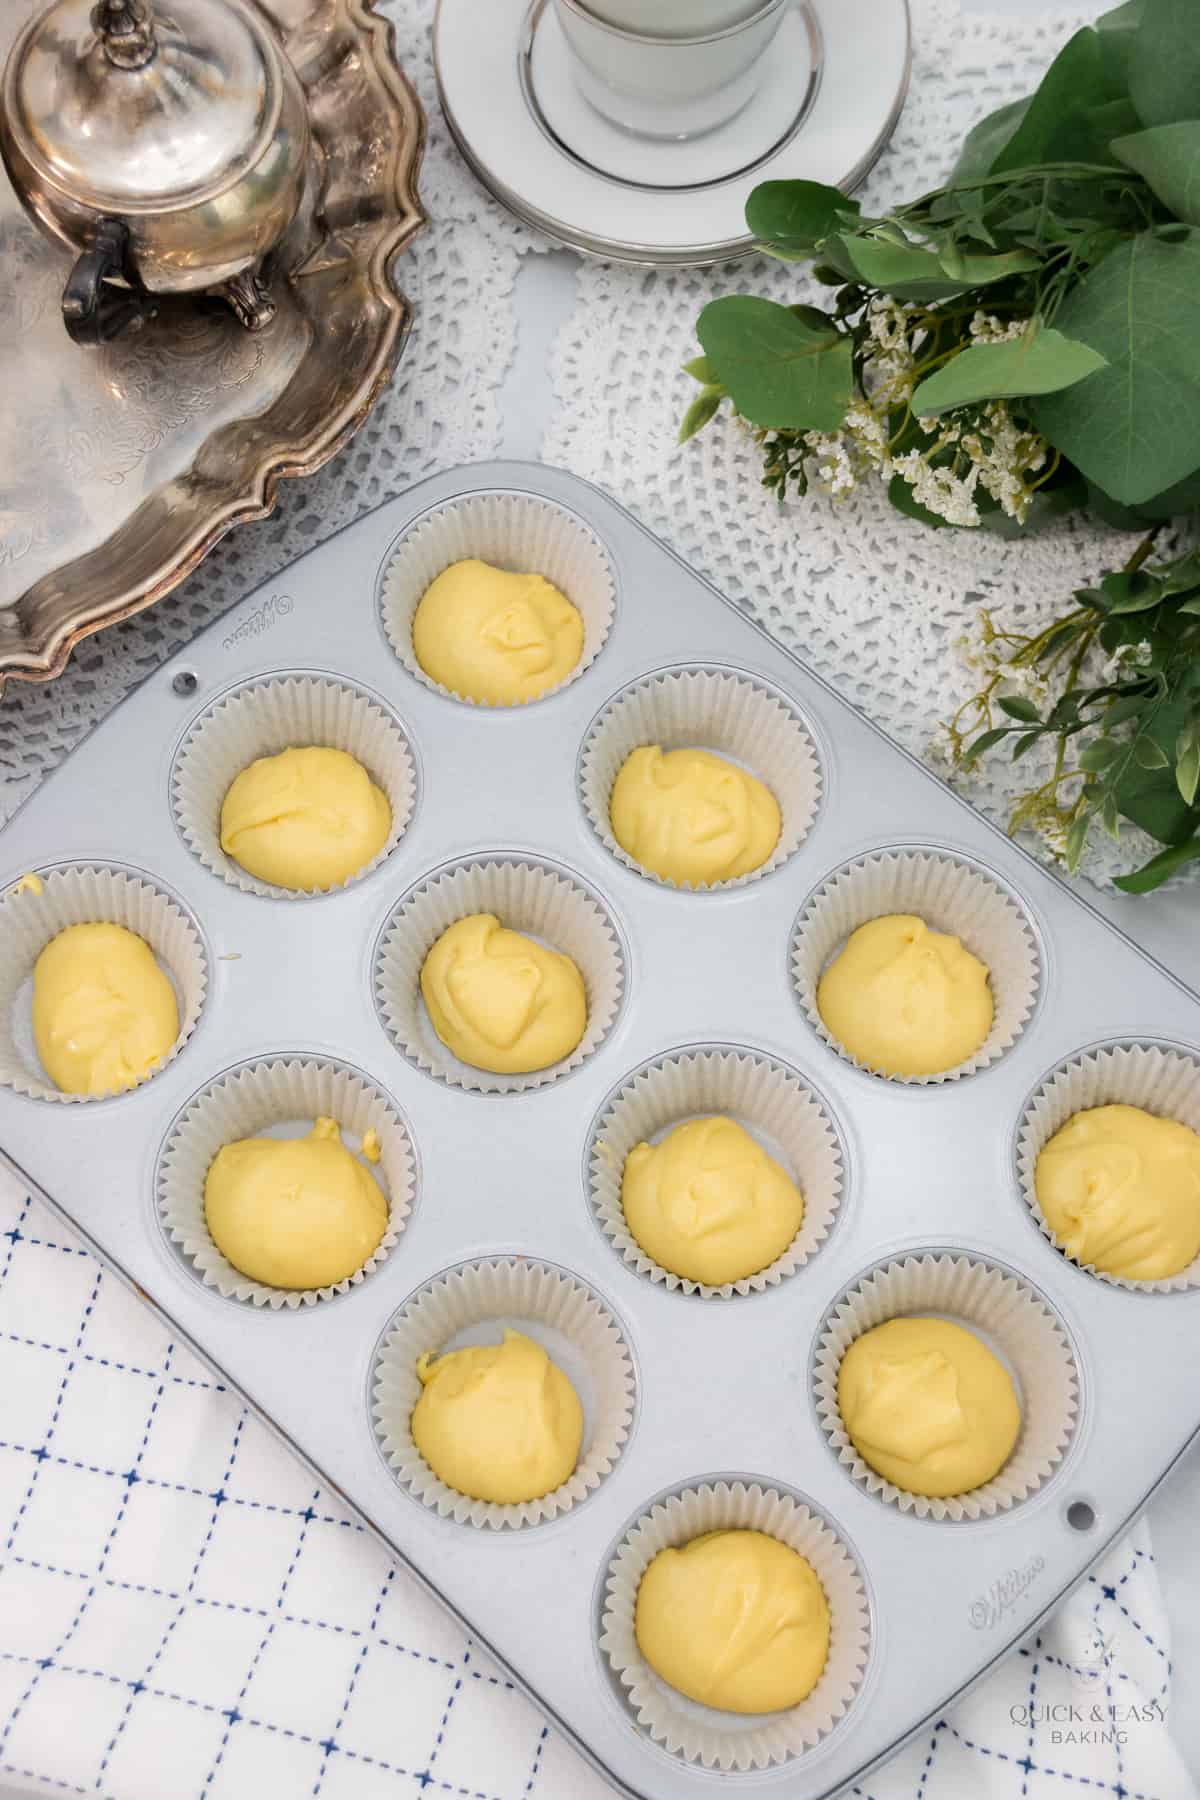 Cupcake liners filled halfway with plain muffin batter.